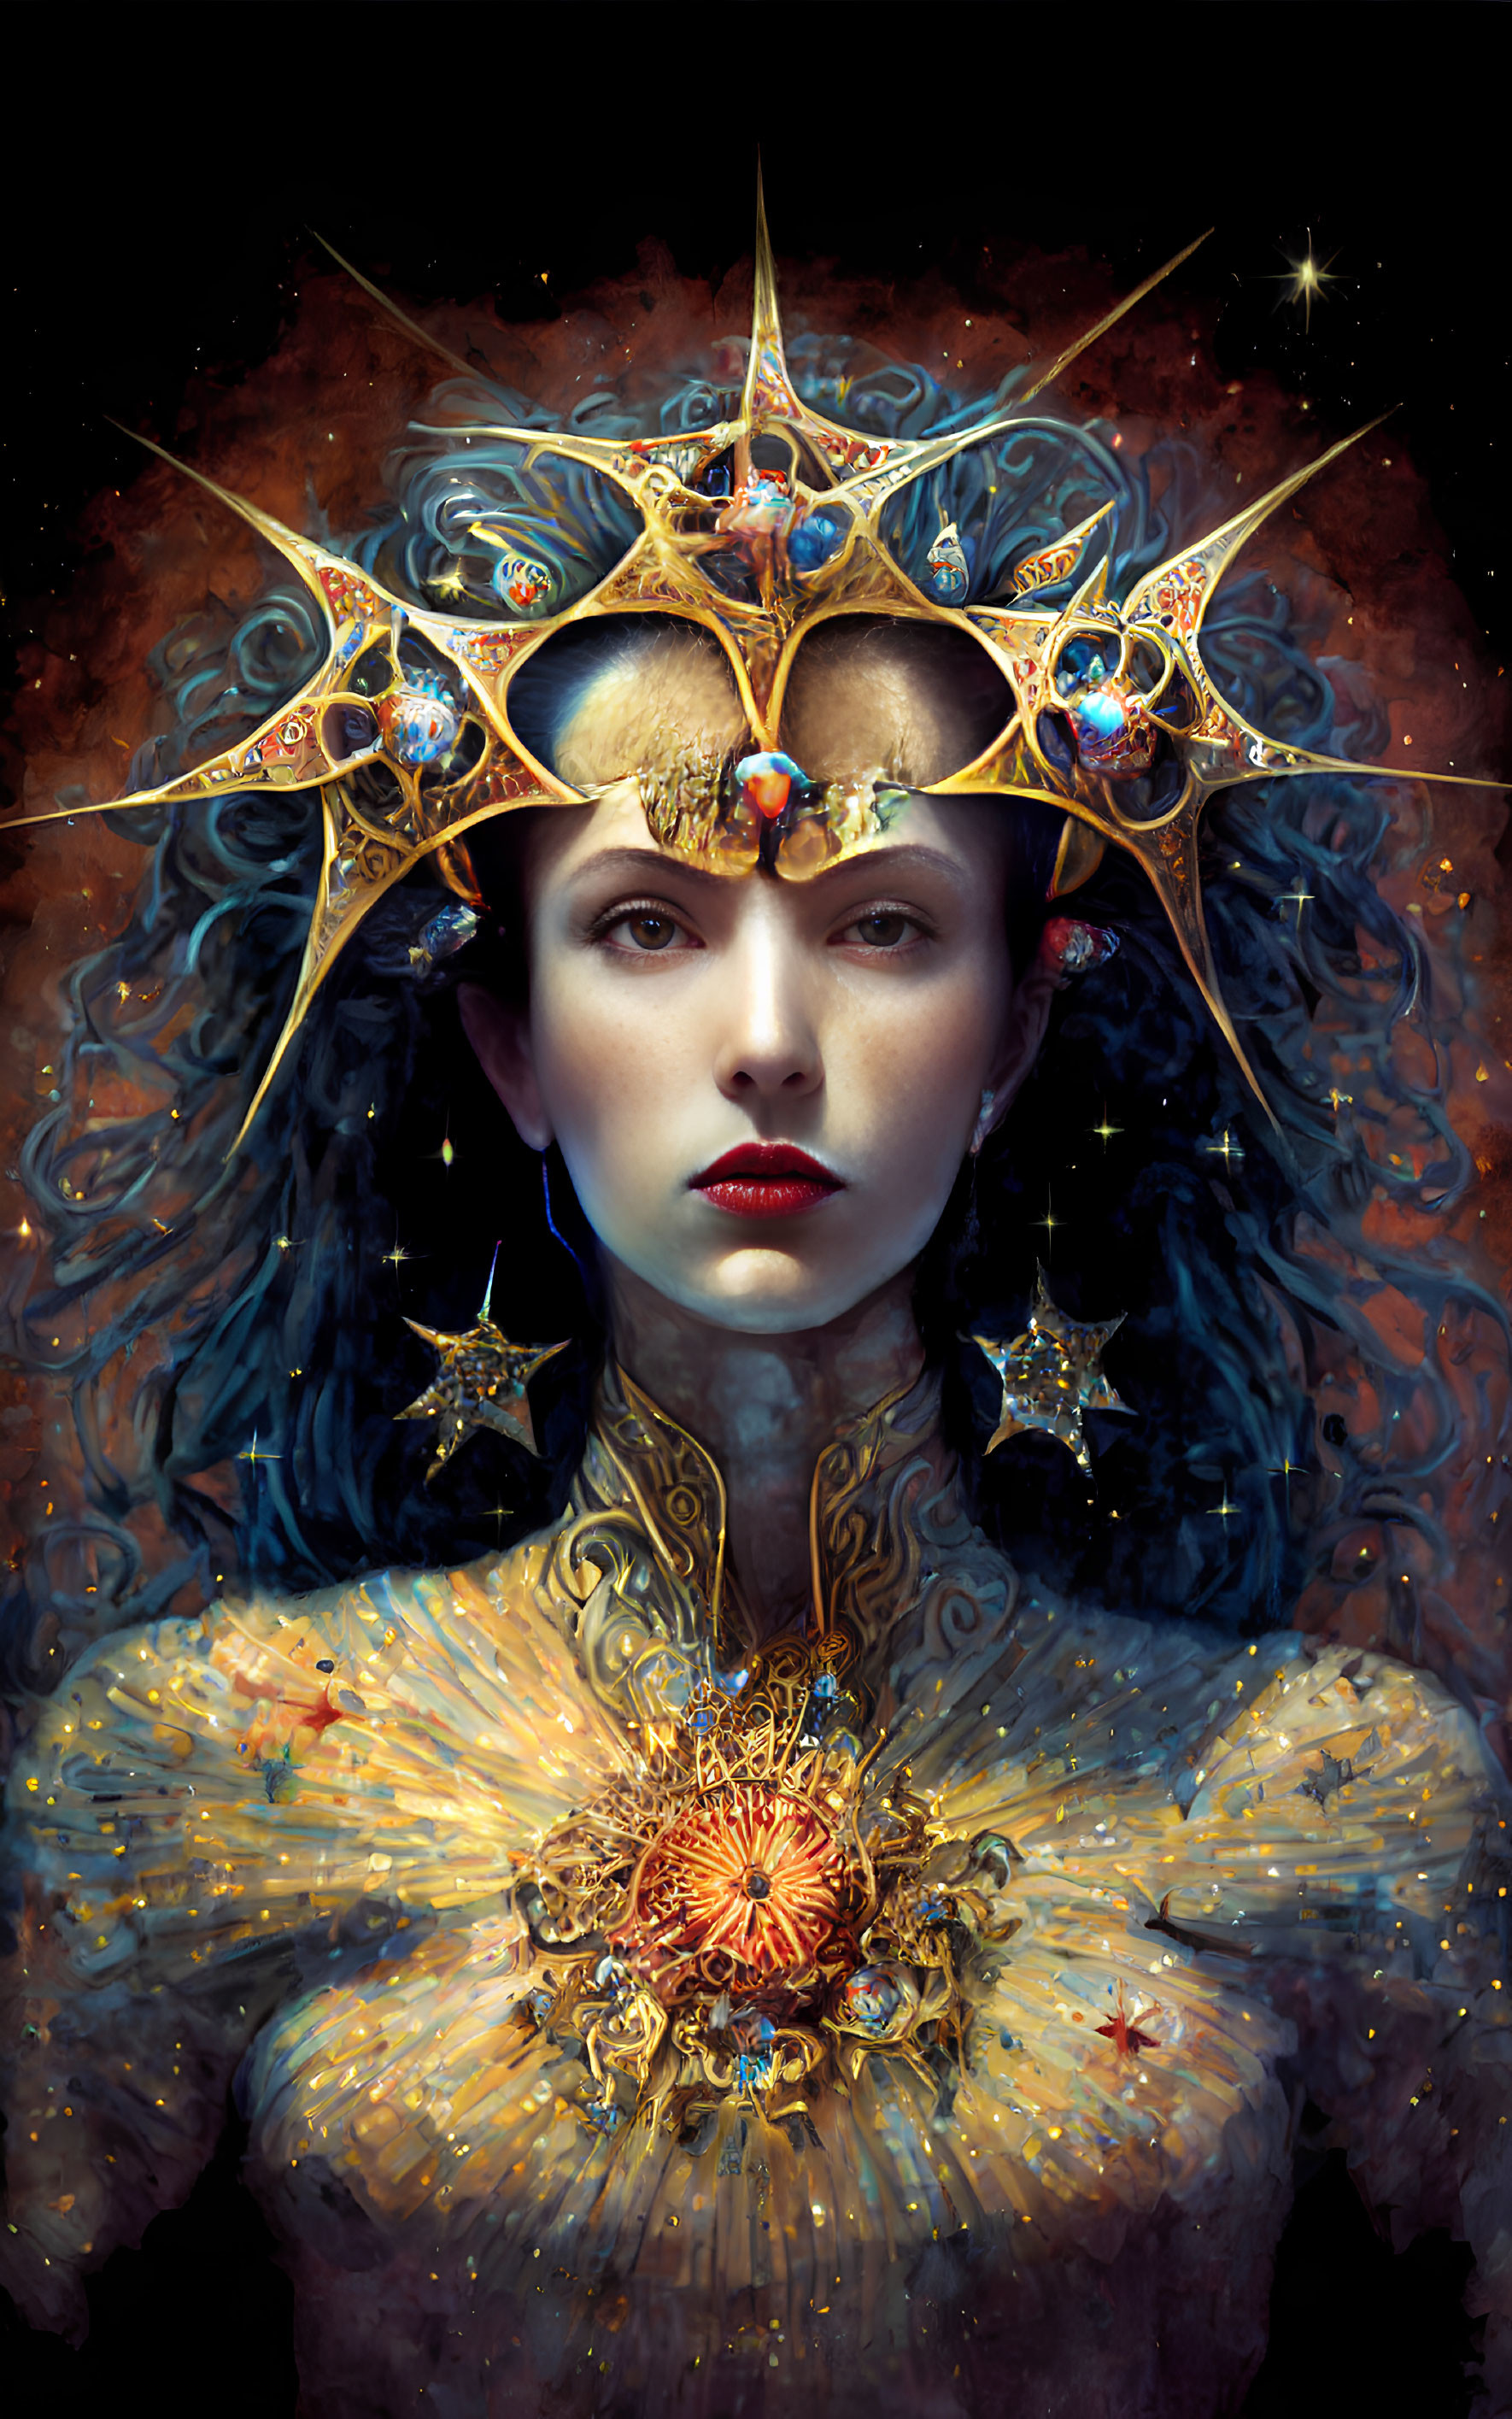 Regal figure with golden headdress and cosmic background